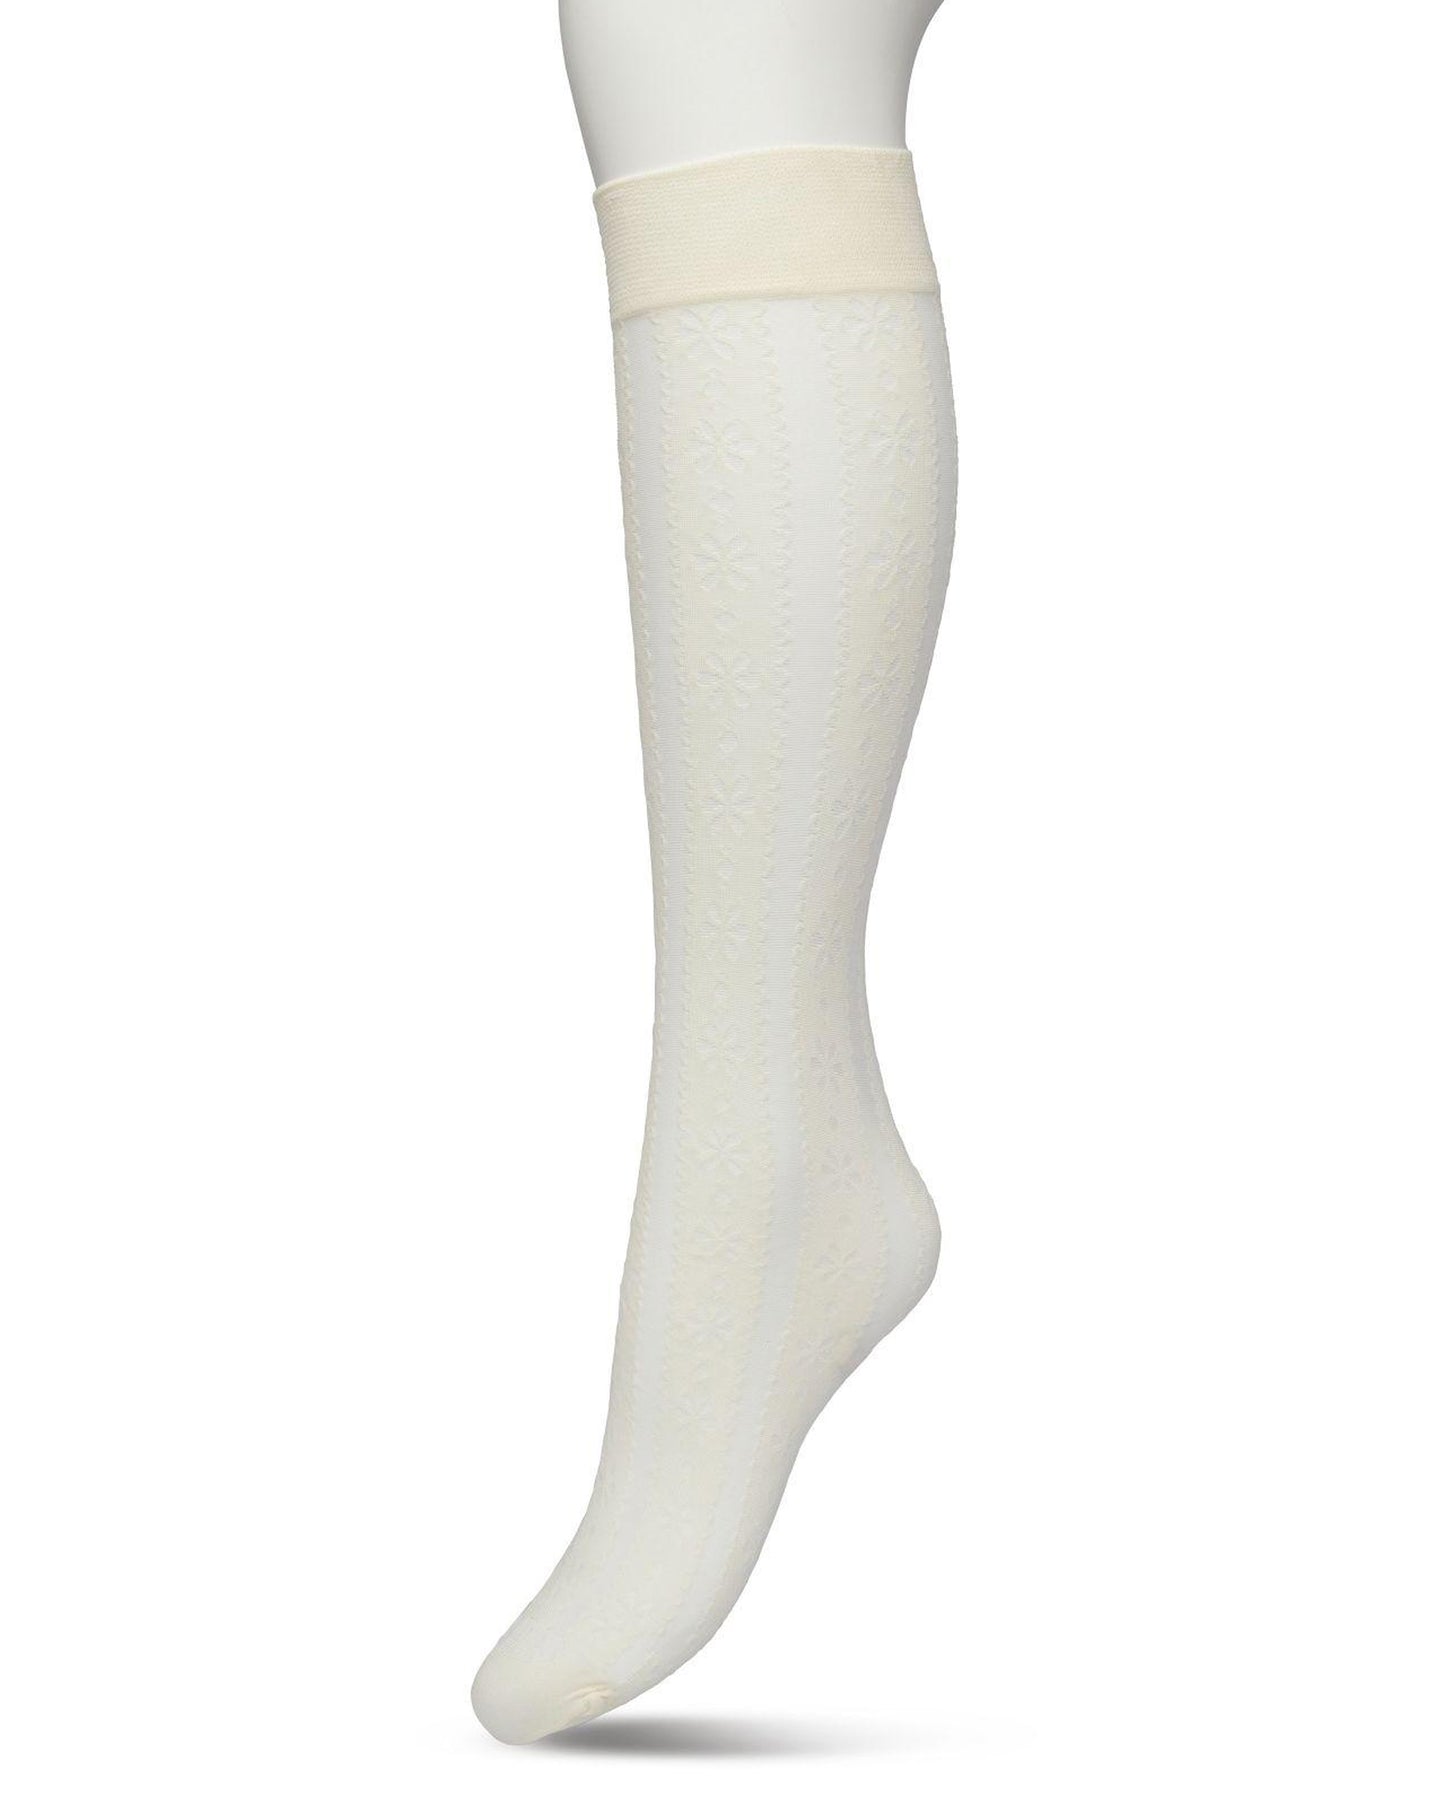 Bonnie Doon Flower Stripe Knee-Highs - Ivory / cream fashion knee-high socks with a vertical stripe pattern with a flower and dot design with scalloped edge, reinforced toe and deep elasticated comfort cuff